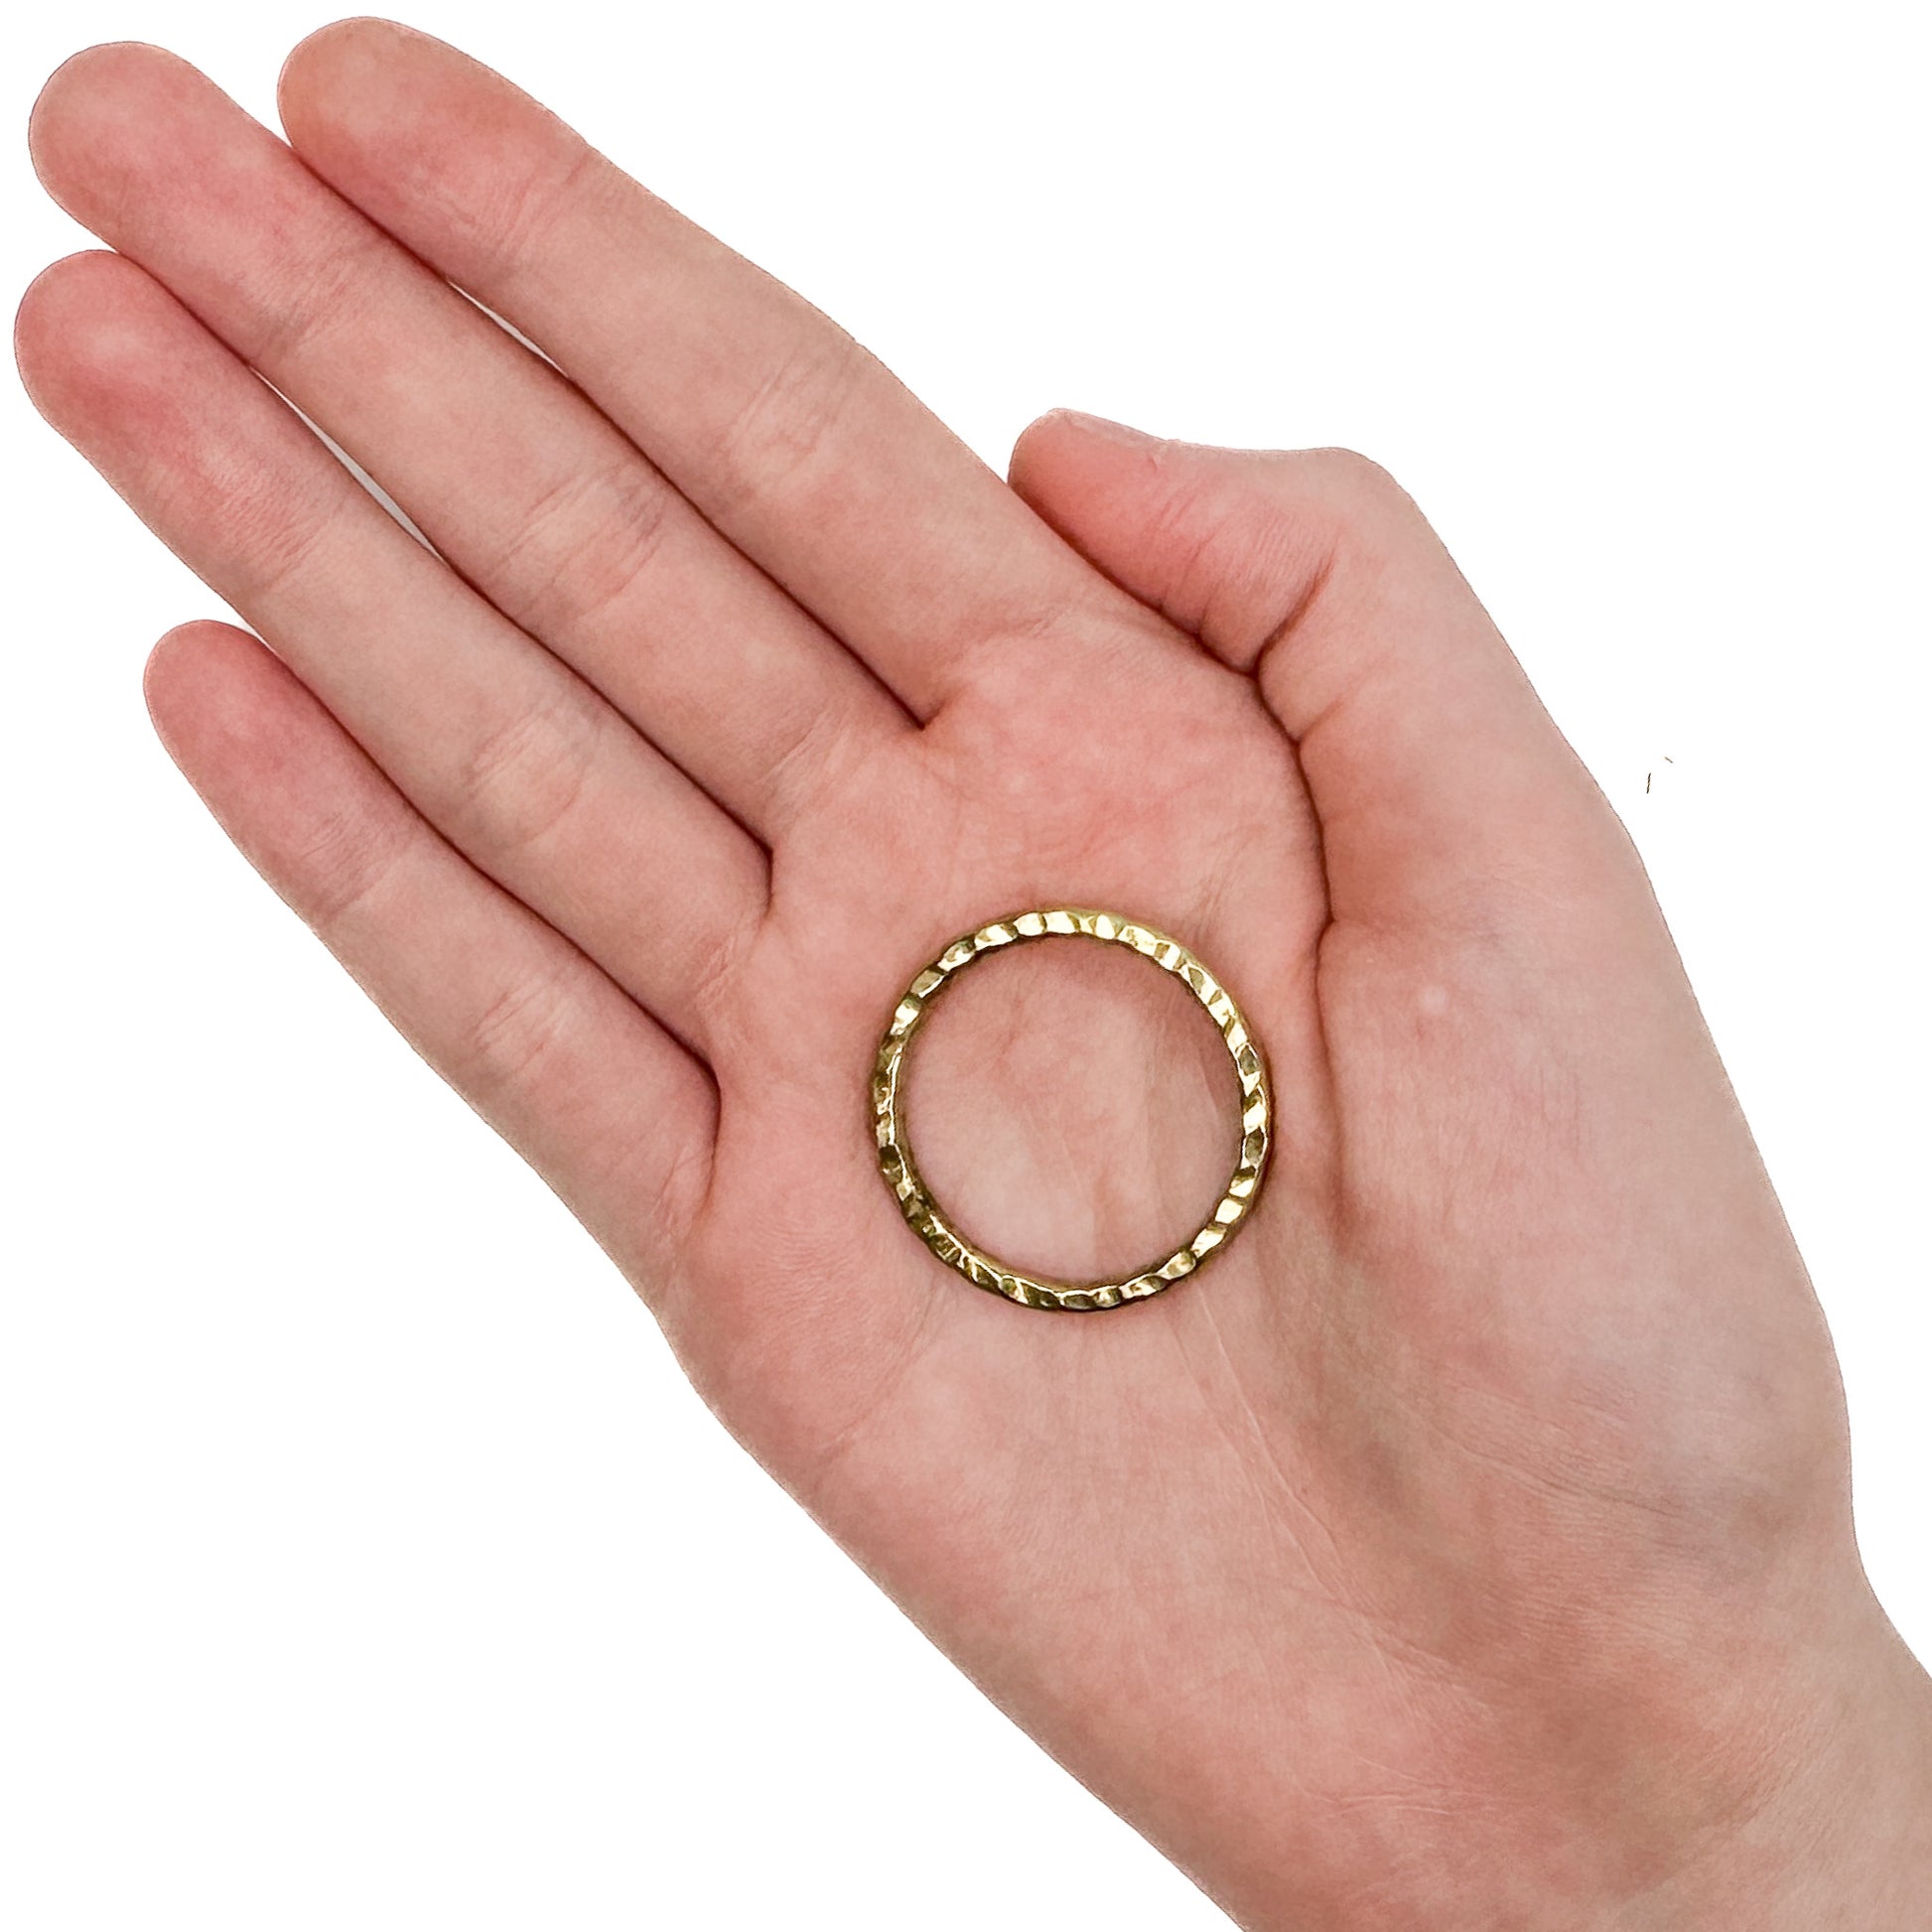 30mm Plated Brass Hammered Ring (3 Metal Options) - 1 pc.-The Bead Gallery Honolulu